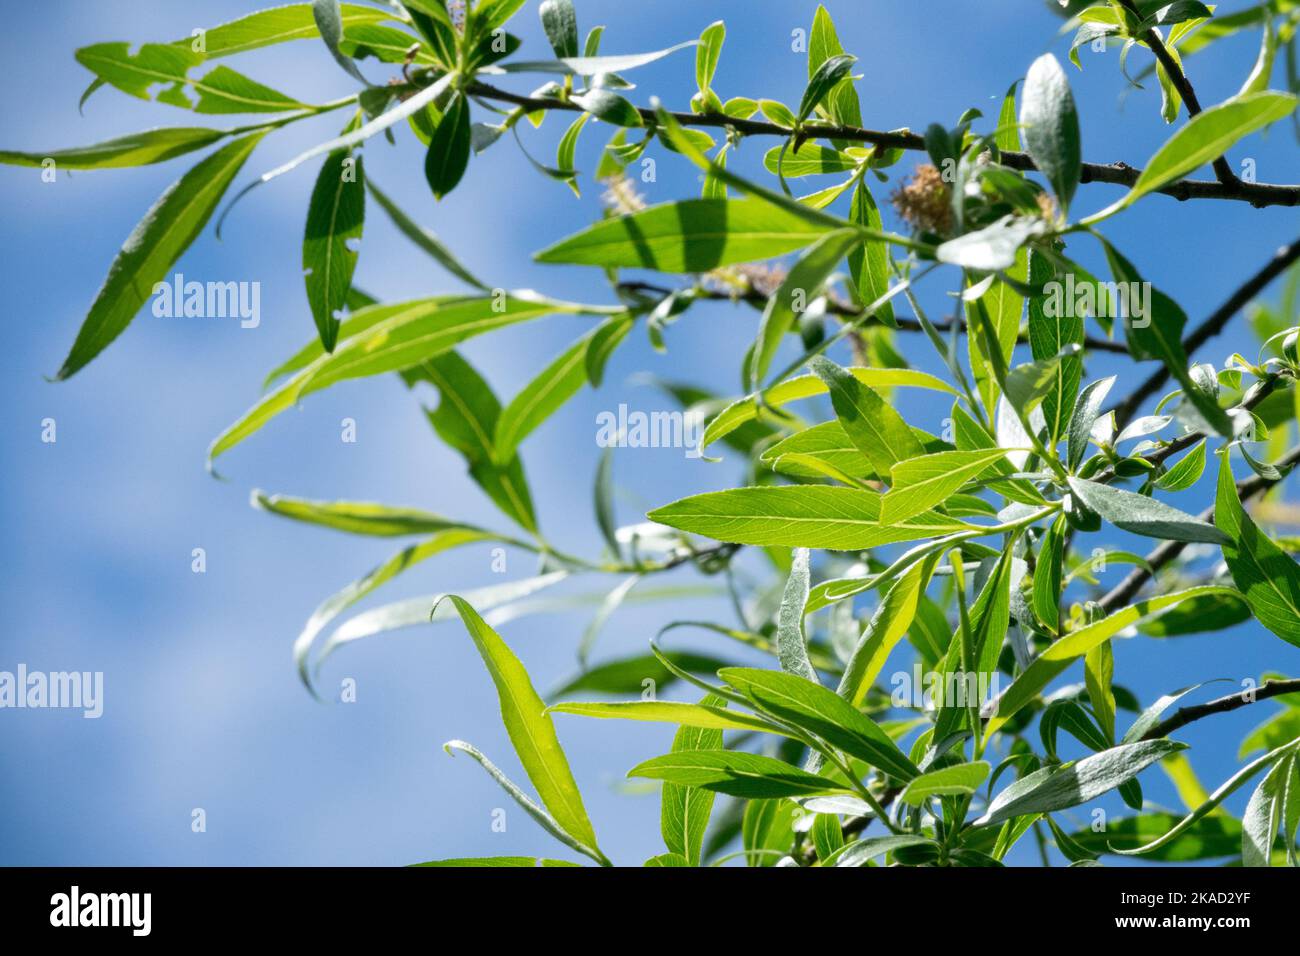 White Willow, Salix alba 'Rockanje' leaves on a branch in spring Willow branch Stock Photo